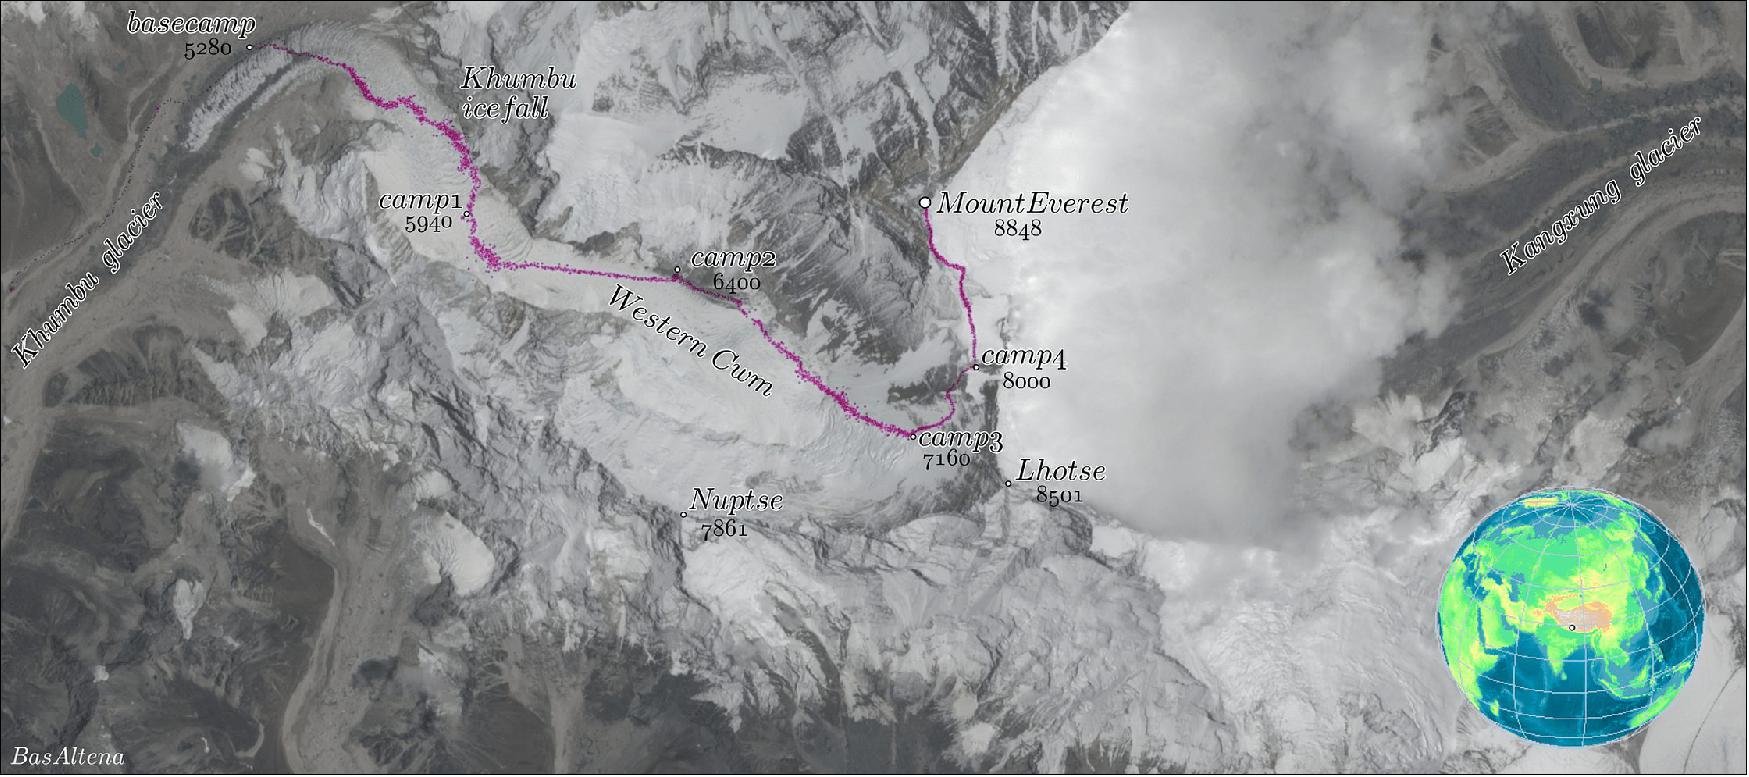 Figure 15: In this Copernicus Sentinel-2 image of Mount Everest, the eastern side of the mountain is obstructed by clouds, while the normal route from the Nepalese side is clearly visible. The GPS trajectories of the climbers on this route are plotted in purple (image credit: ESA, the image contains modified Copernicus Sentinel data (2020), processed by the Department of Geosciences, University of Oslo)